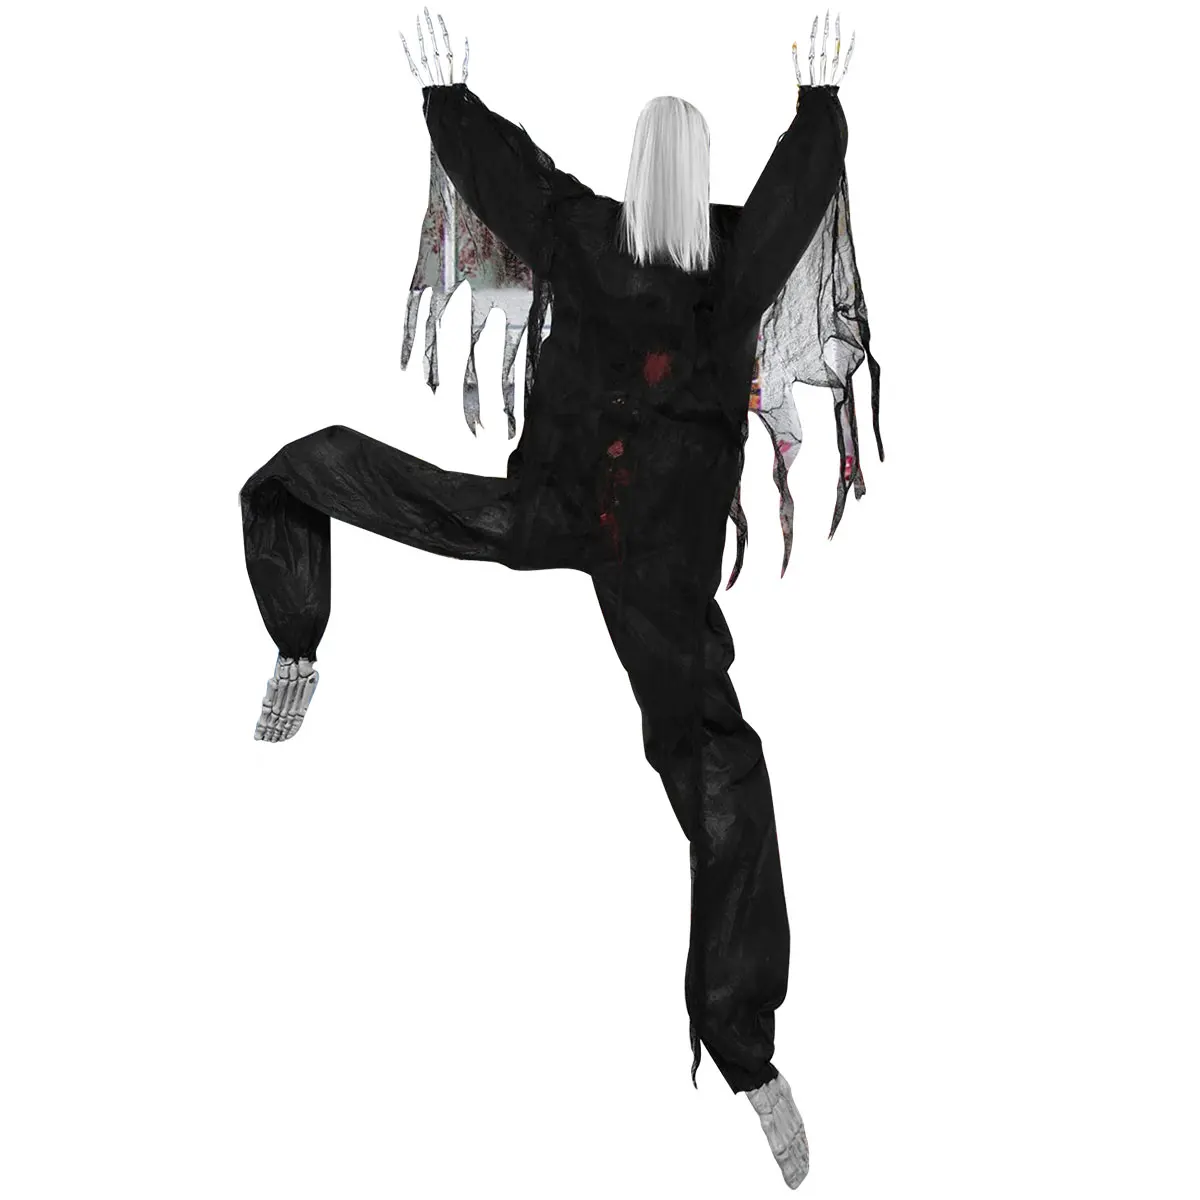 

57 Inch Life-Size Halloween Climbing Zombies for Halloween Decor White Hair Creepy Climbing Zombie with Flexible Limbs for Wall